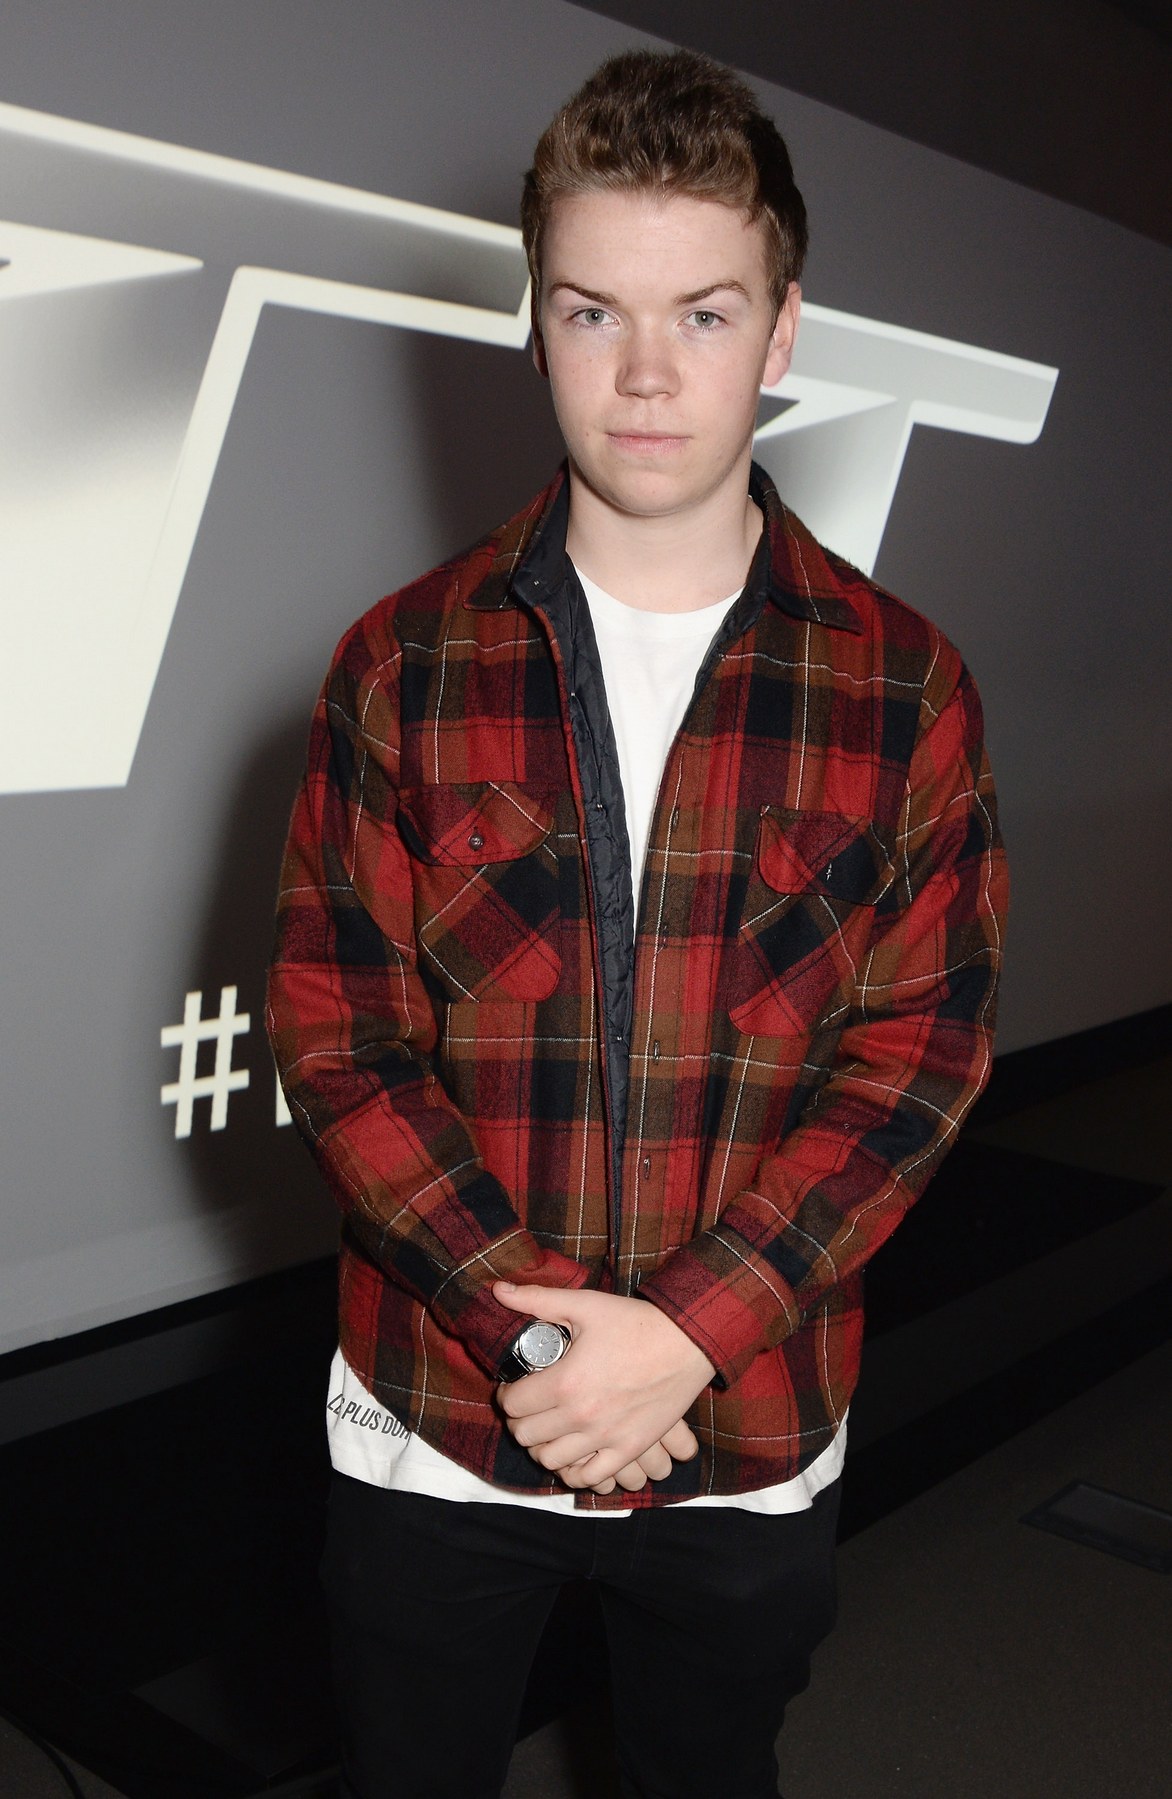 Will Poulter at Audi event